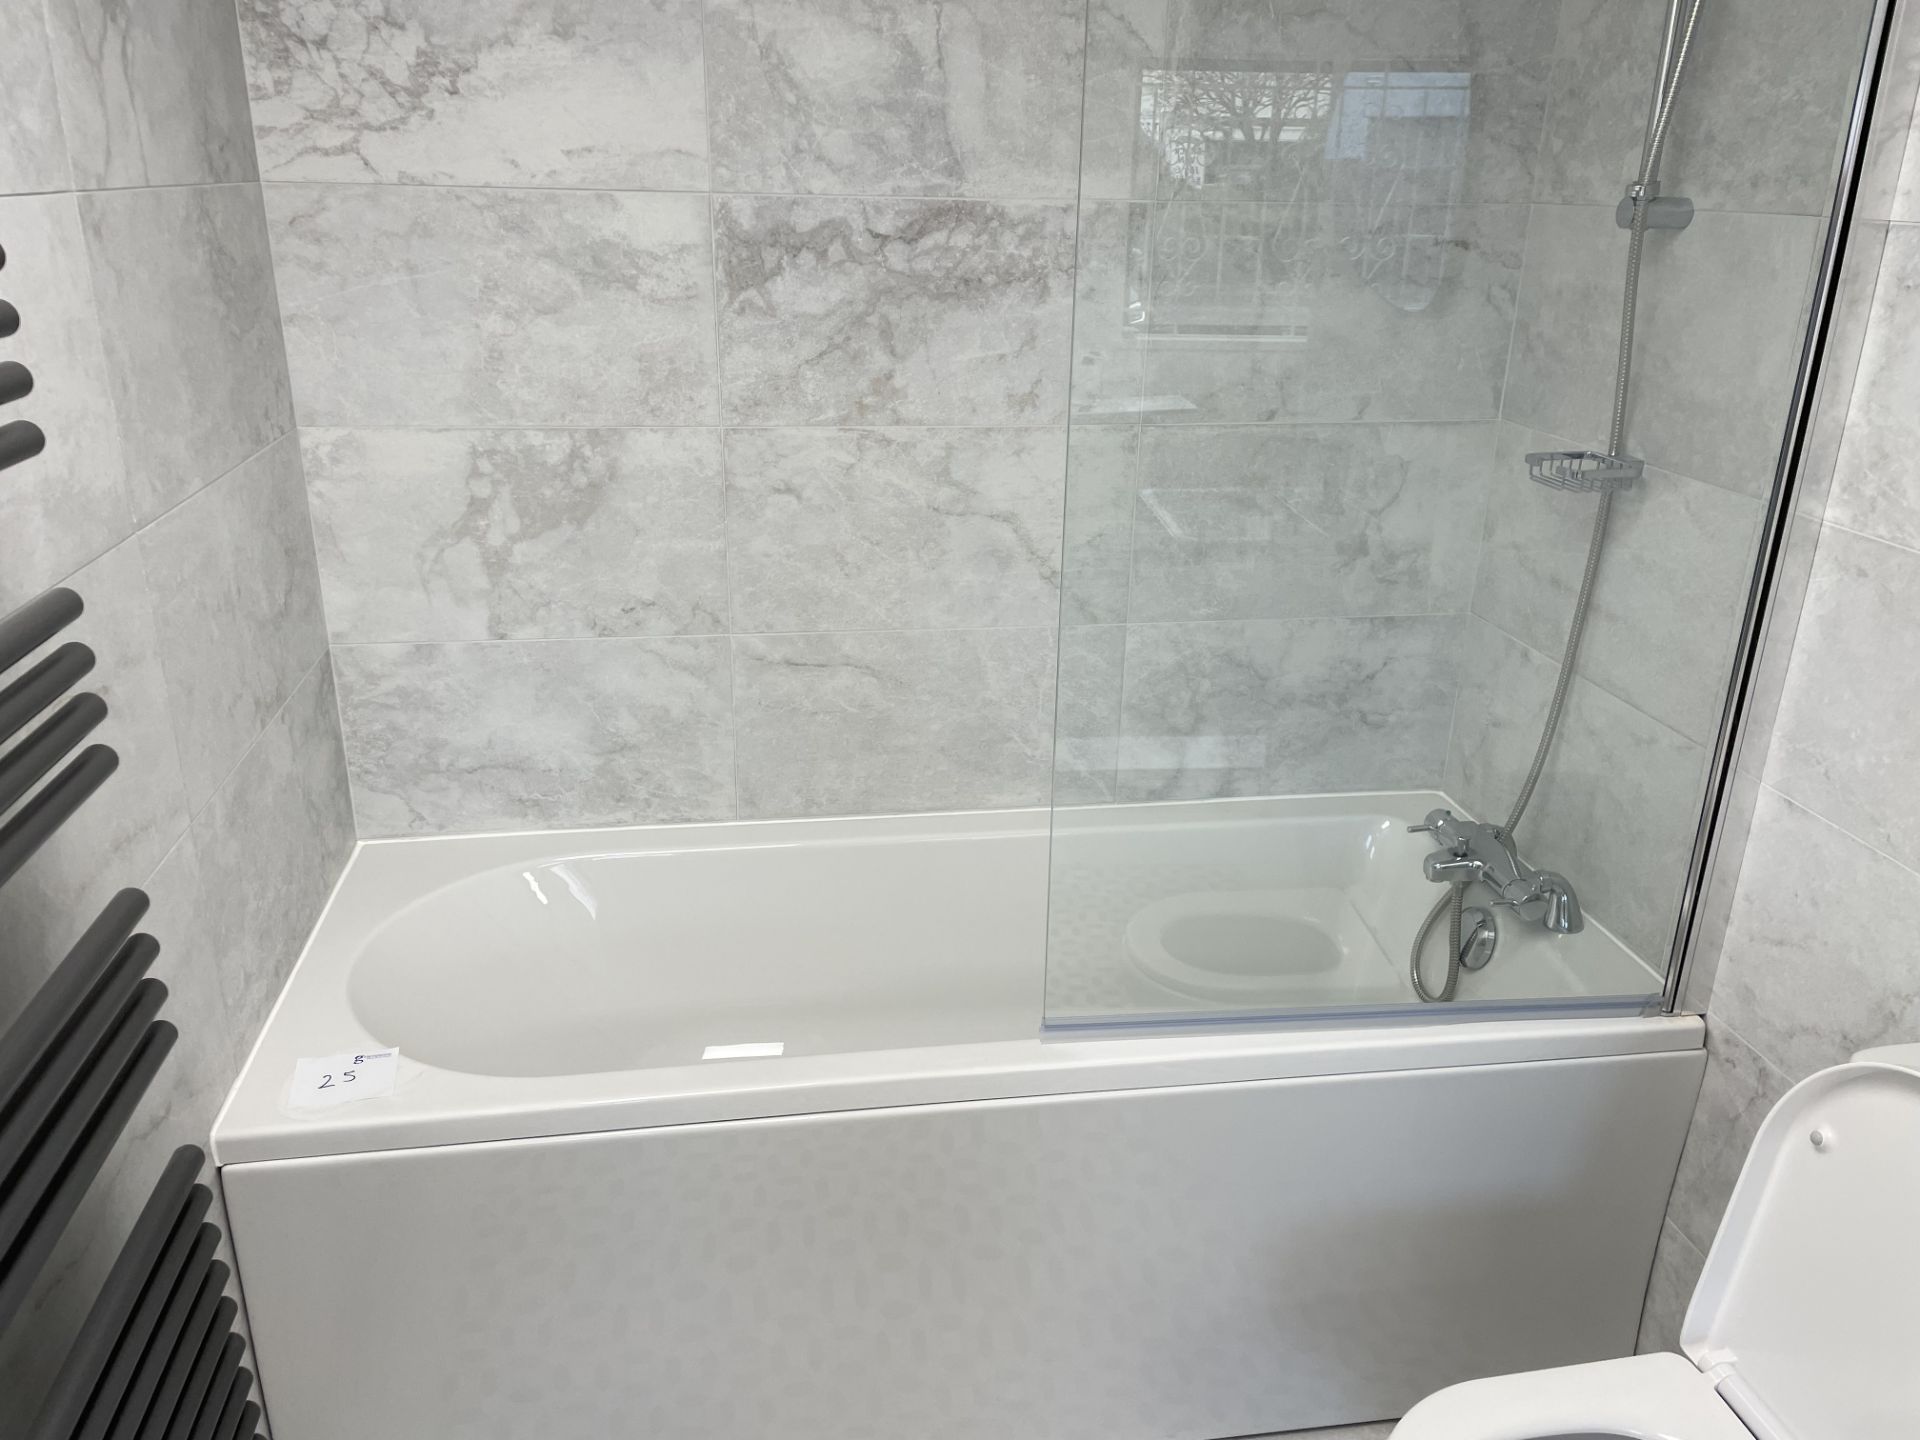 BATH WITH SIDE PANEL MIXER TAP & SHOWER SCREEN 700 x 1700